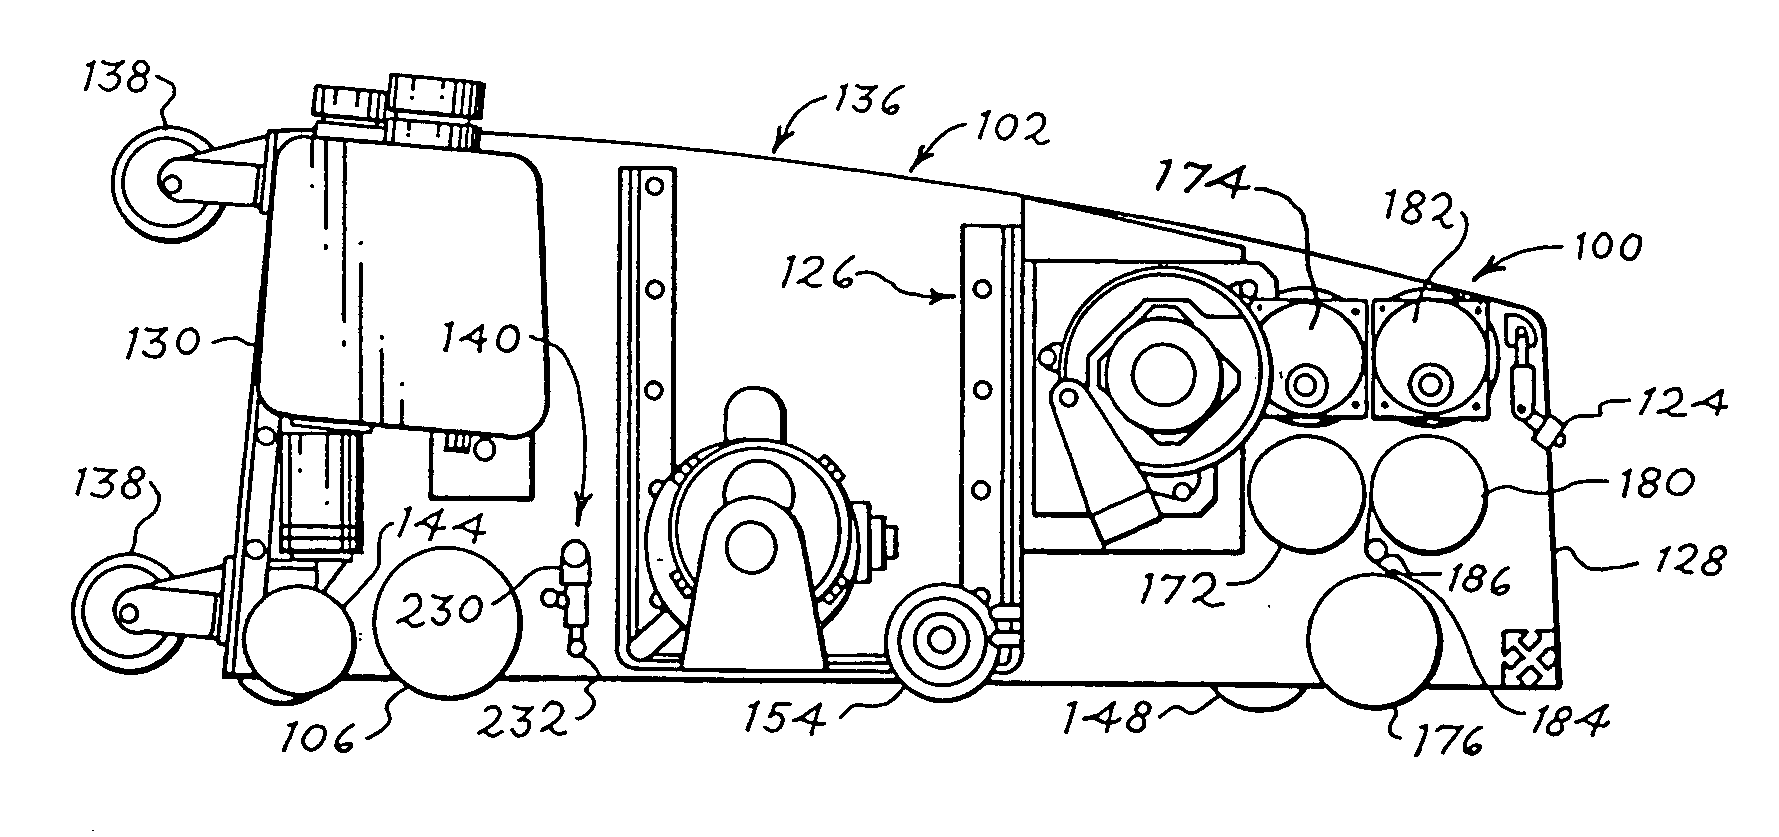 Apparatus and method for conditioning a bowling lane using precision delivery injectors